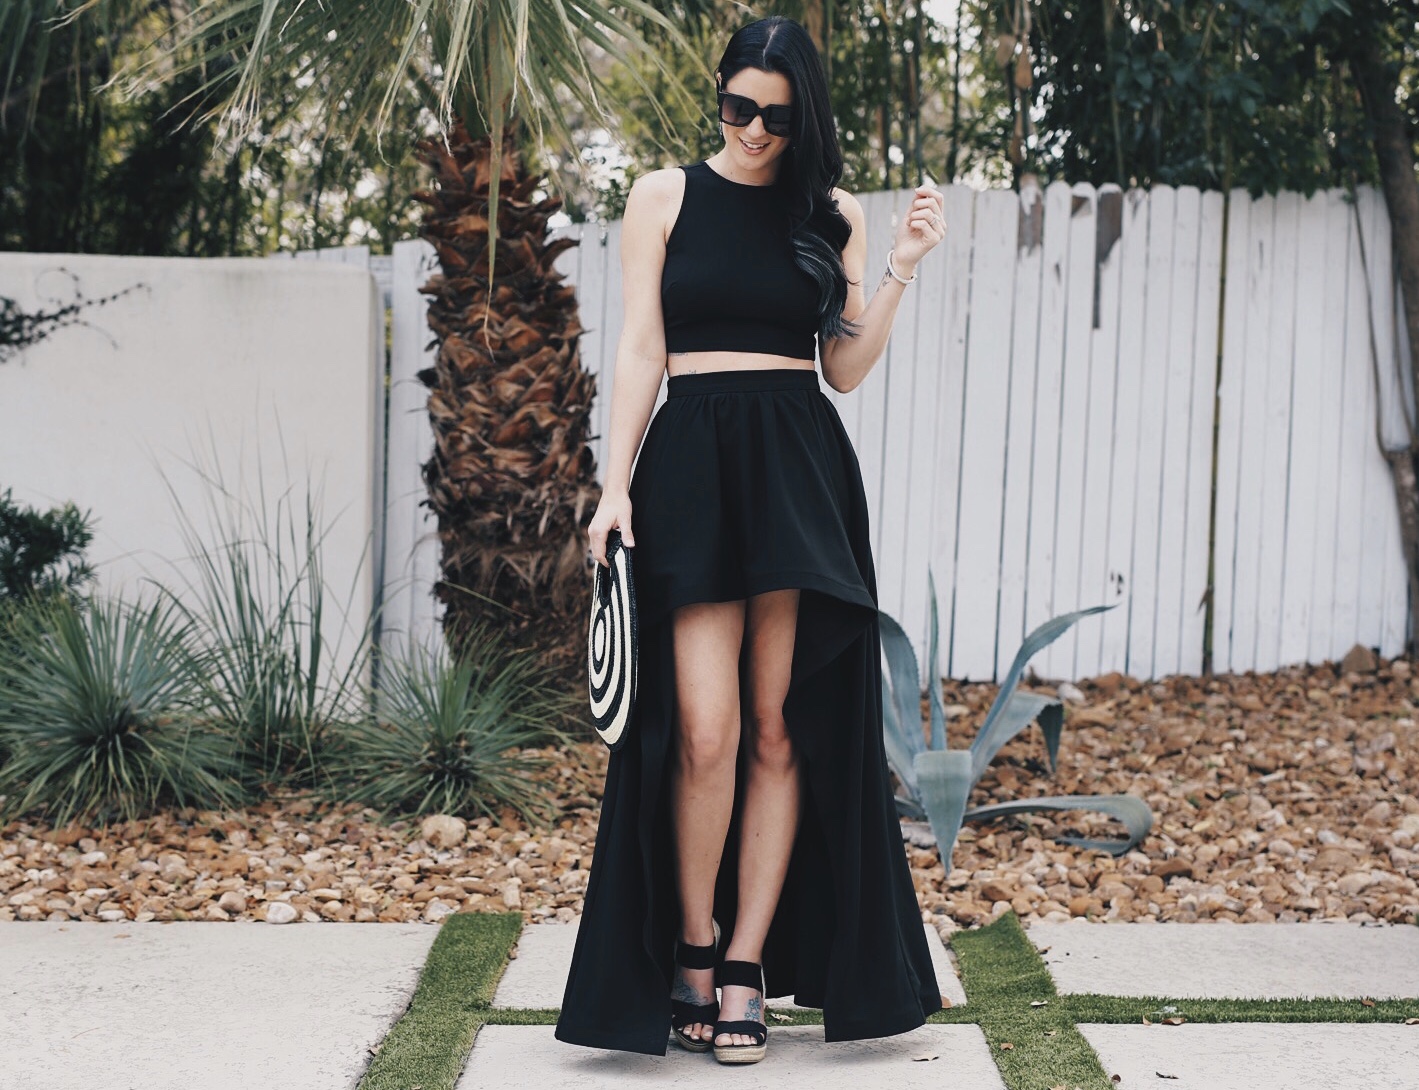 DTKAustin shares one of her most dramatic summer looks; a back two piece, high low skirt set from Akira with a straw round bag from Anthropologie.